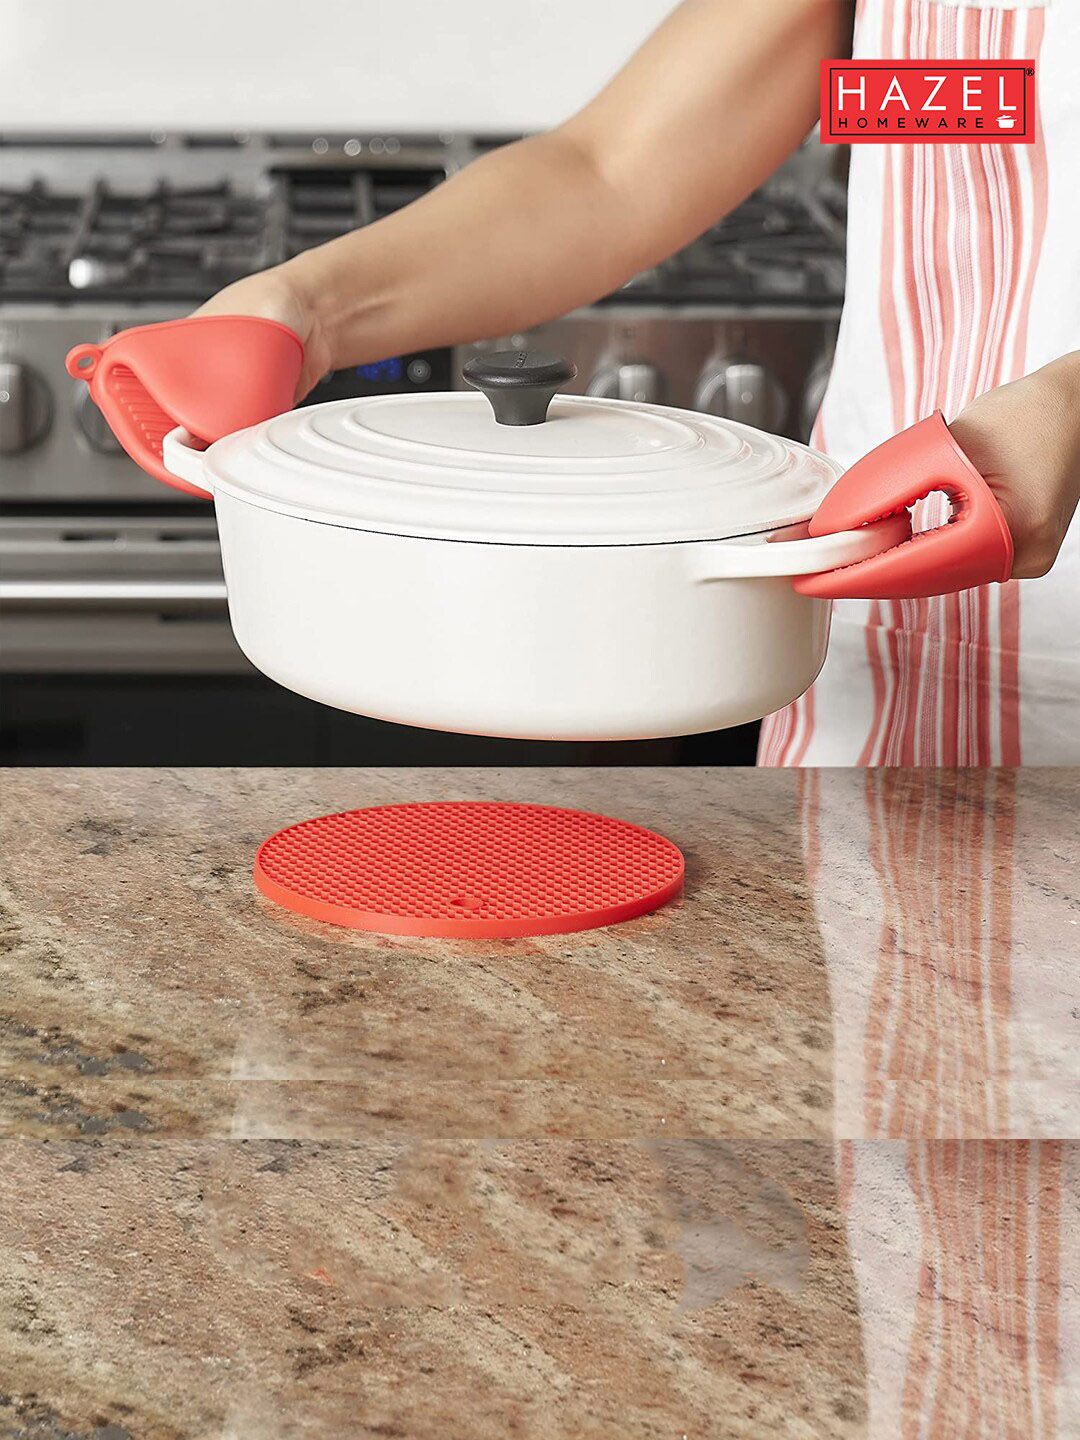 HAZEL Red & Blue Silicone Heat Resistant Trivet Price in India